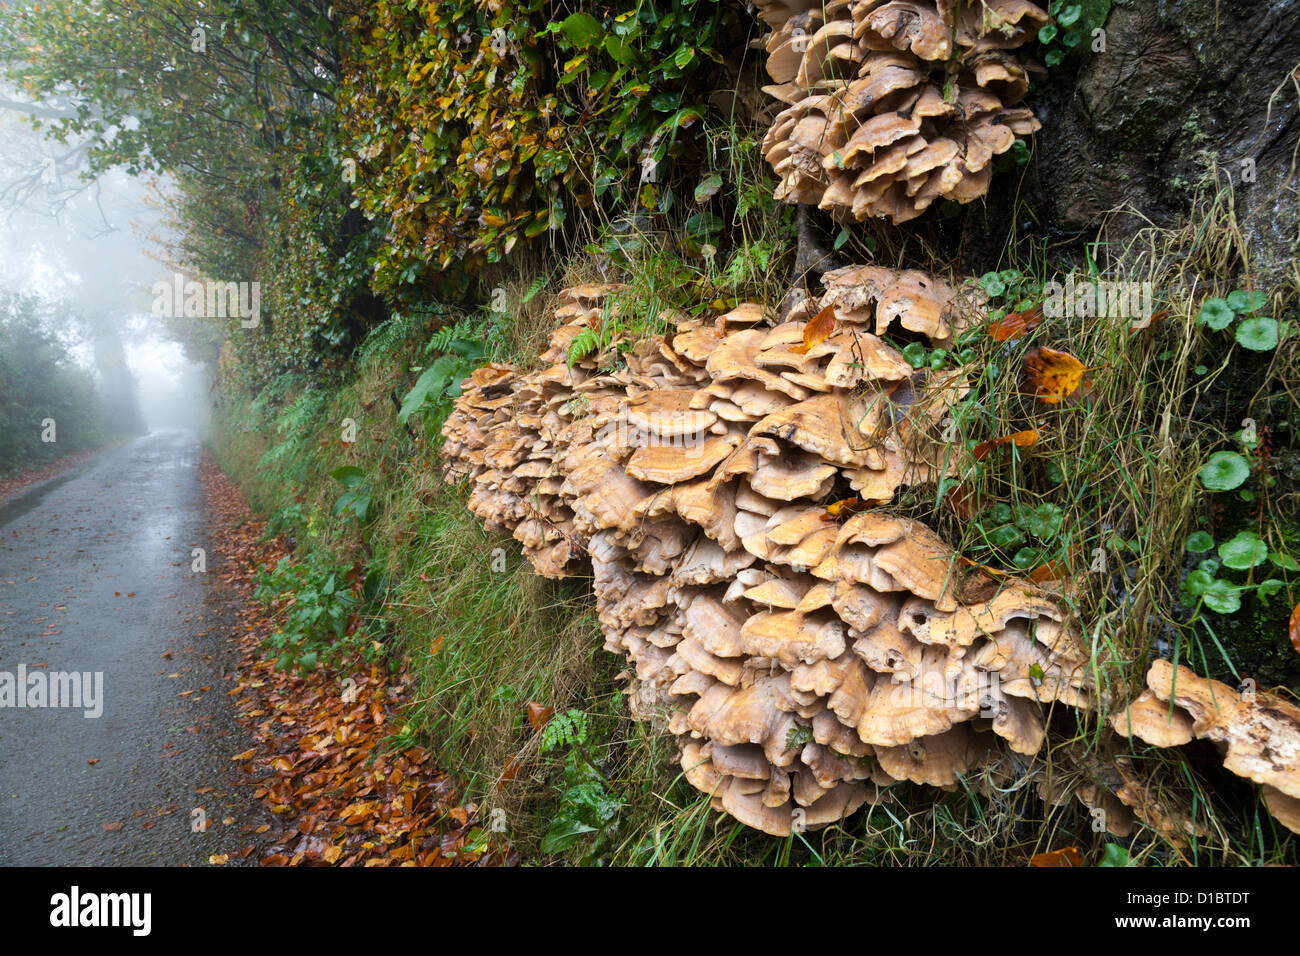 Meripilus giganteus, the Giant Polypore fungus, growing on the roots of a beech tree in autumn in an Exmoor lane, Somerset, UK Stock Photo